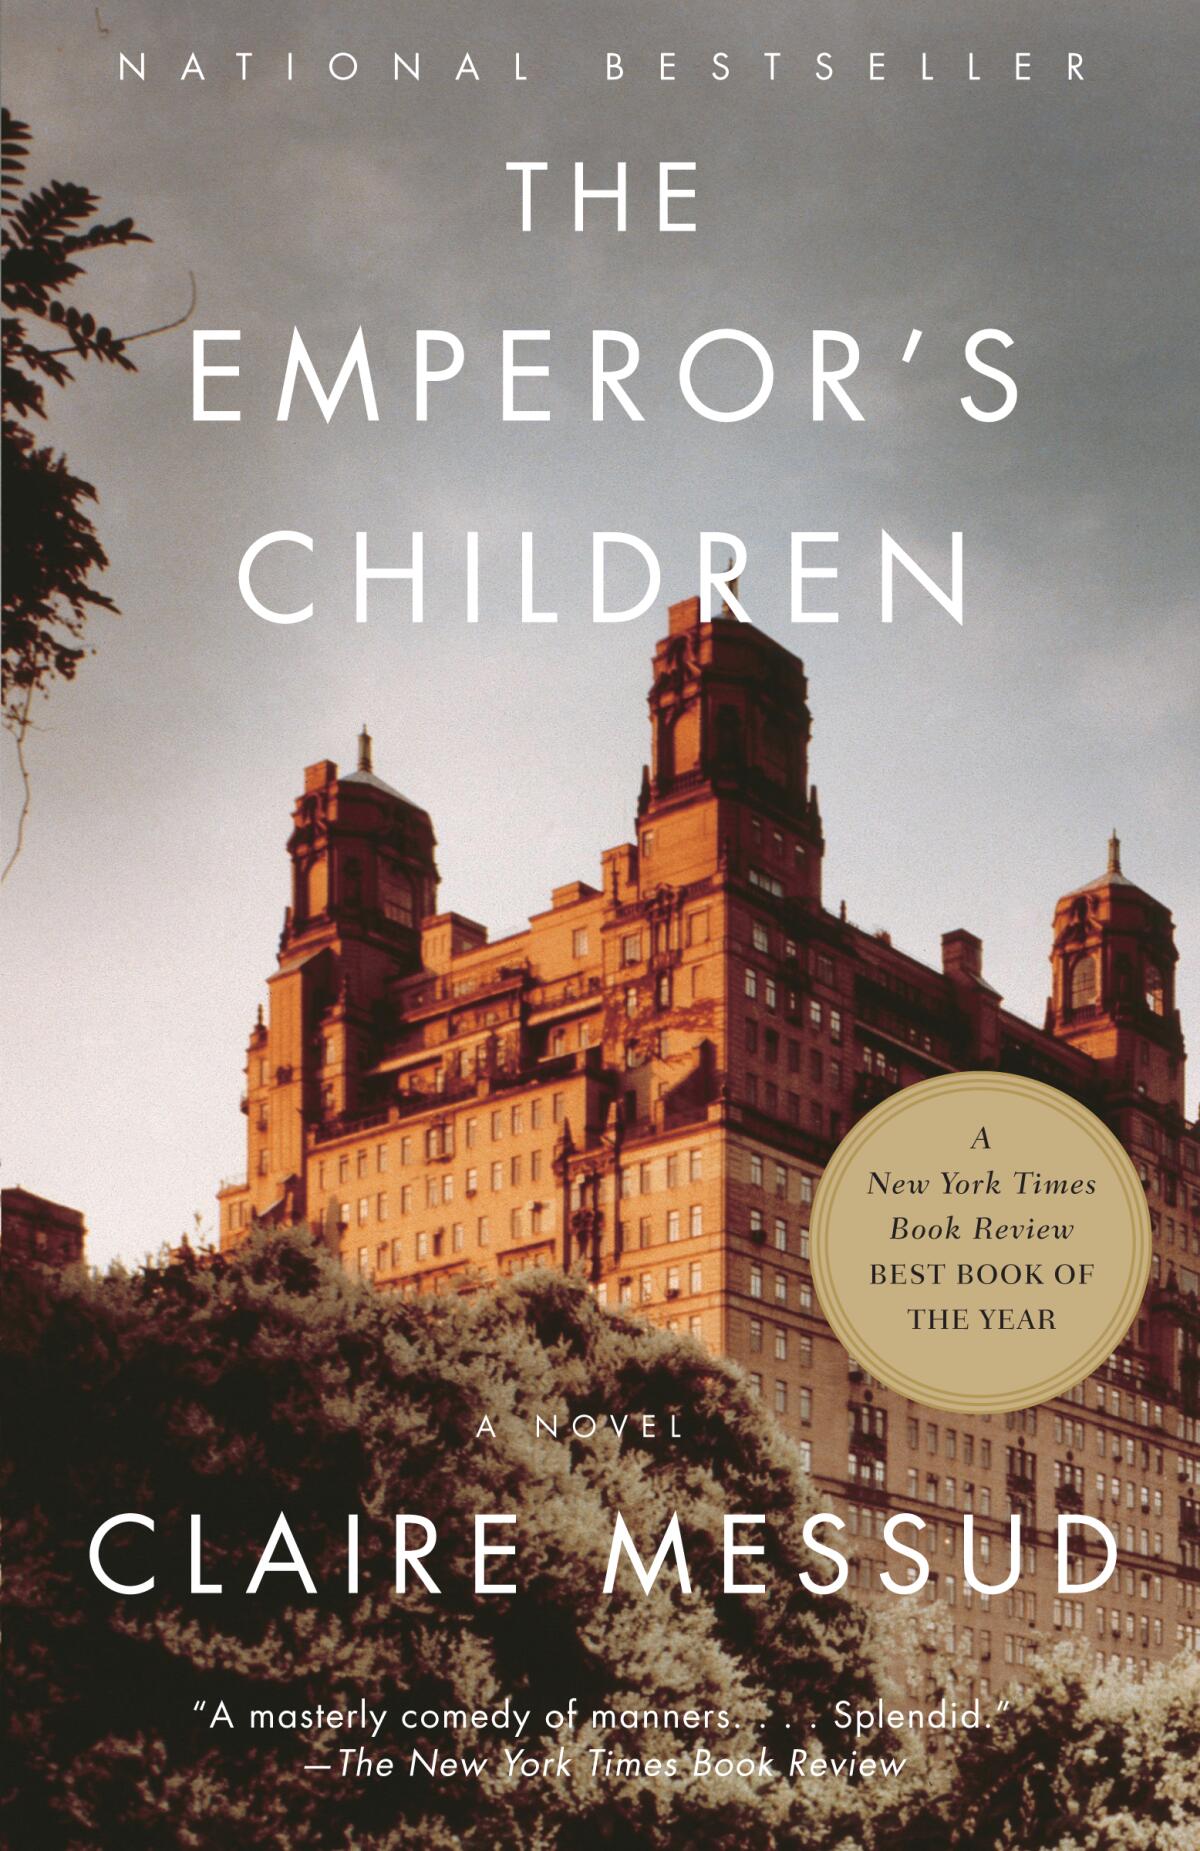 Book jacket for "The Emperor's Children" by Claire Messud.